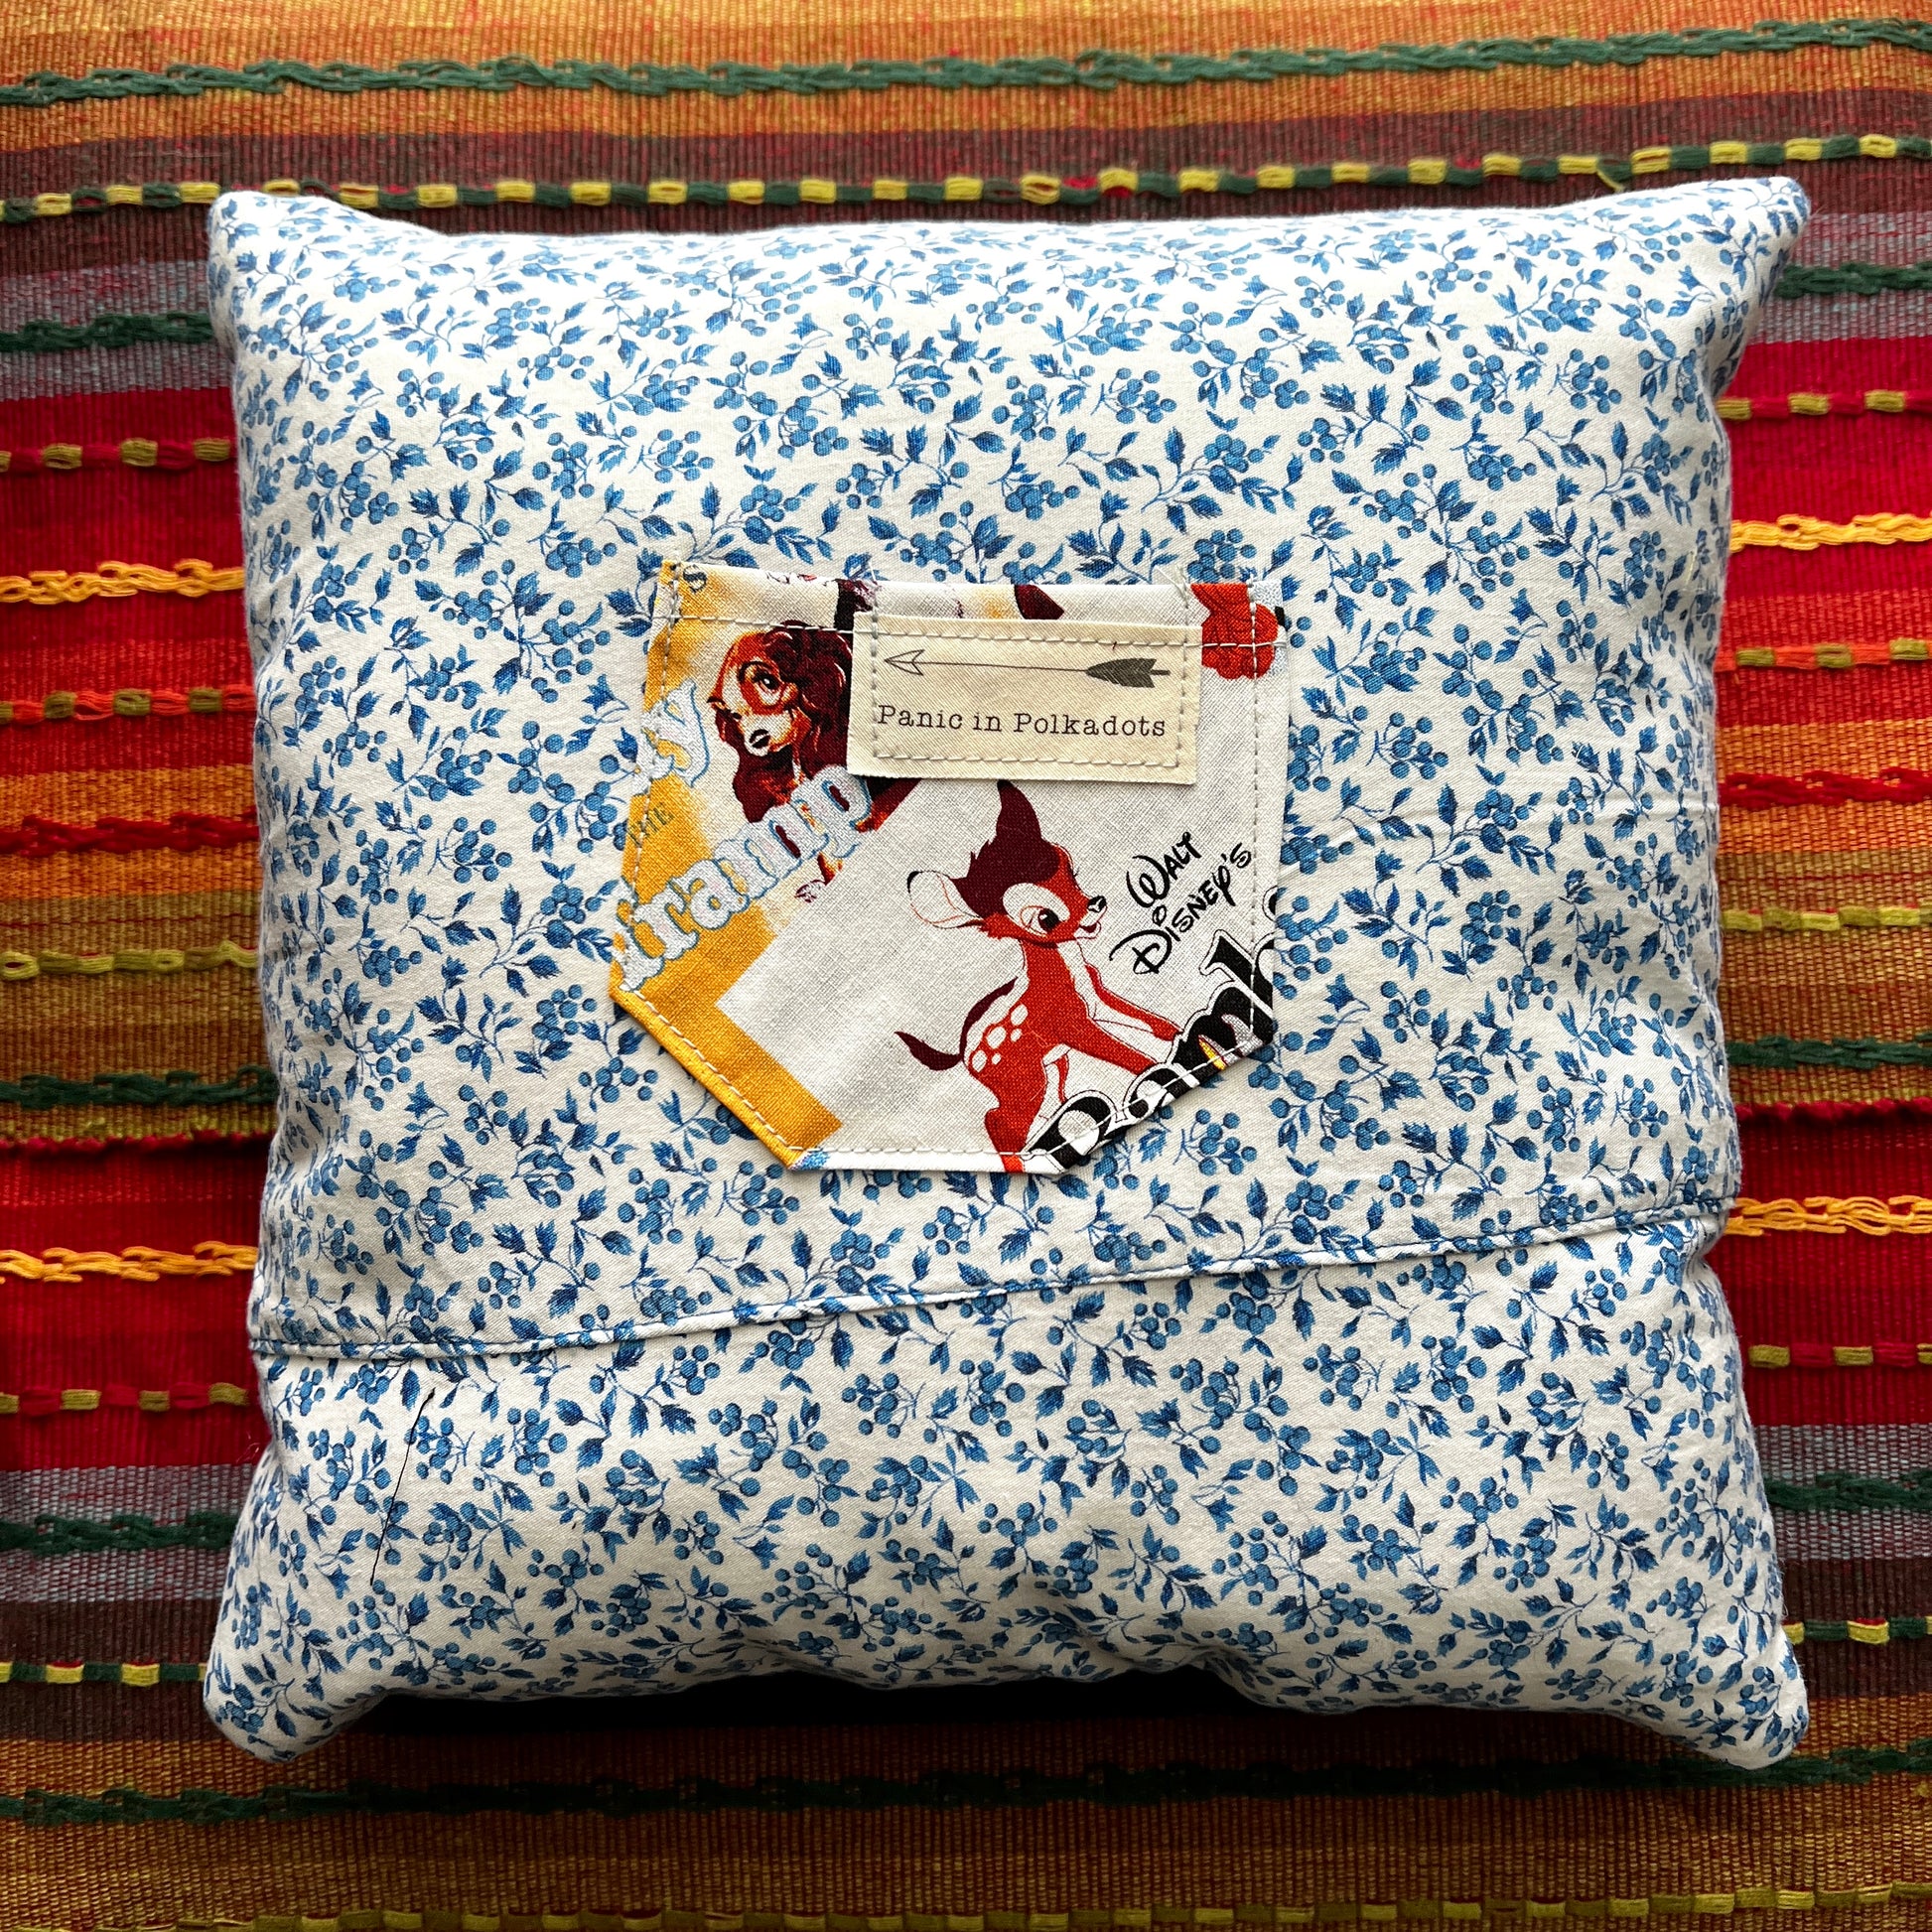 back view of disney dumbo cathedral square pillow, with blue florals and bambi movie poster